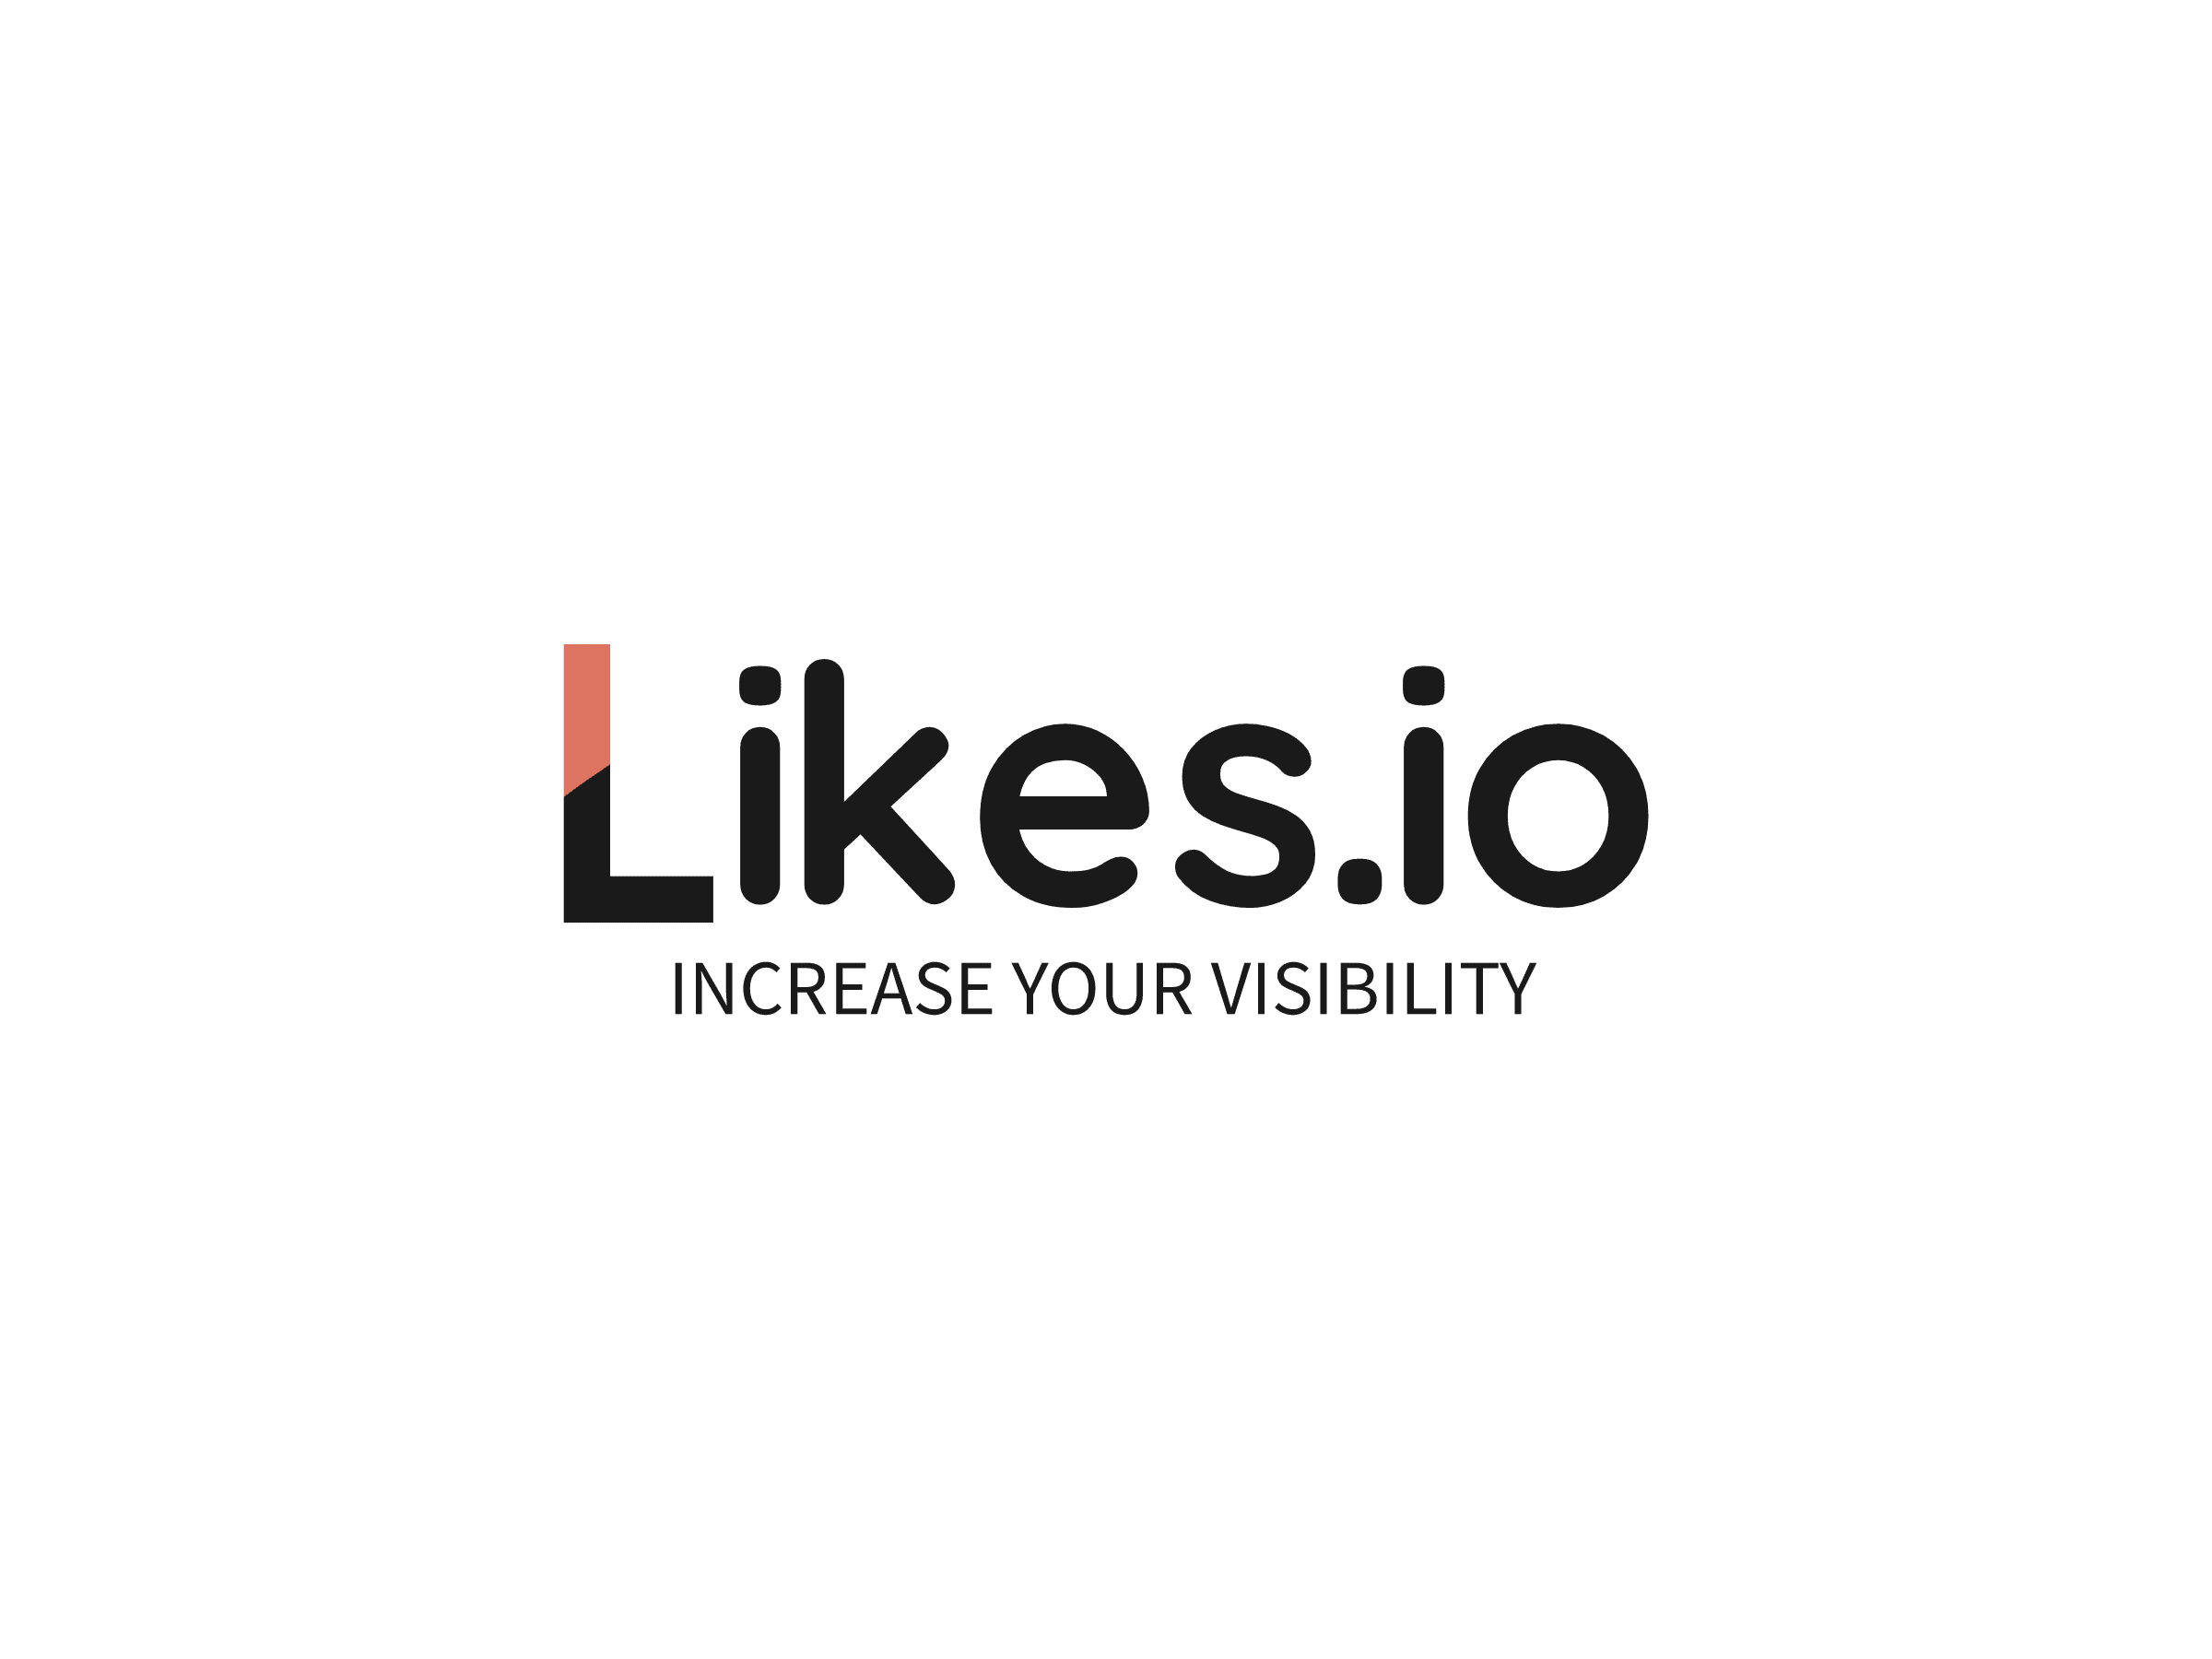 Likes.io is a social media engagement service that helps users increase their visibility and boost their online presence. With Likes.io, users can easily and quickly get more likes, followers, and views for their social media profiles, including Instagram